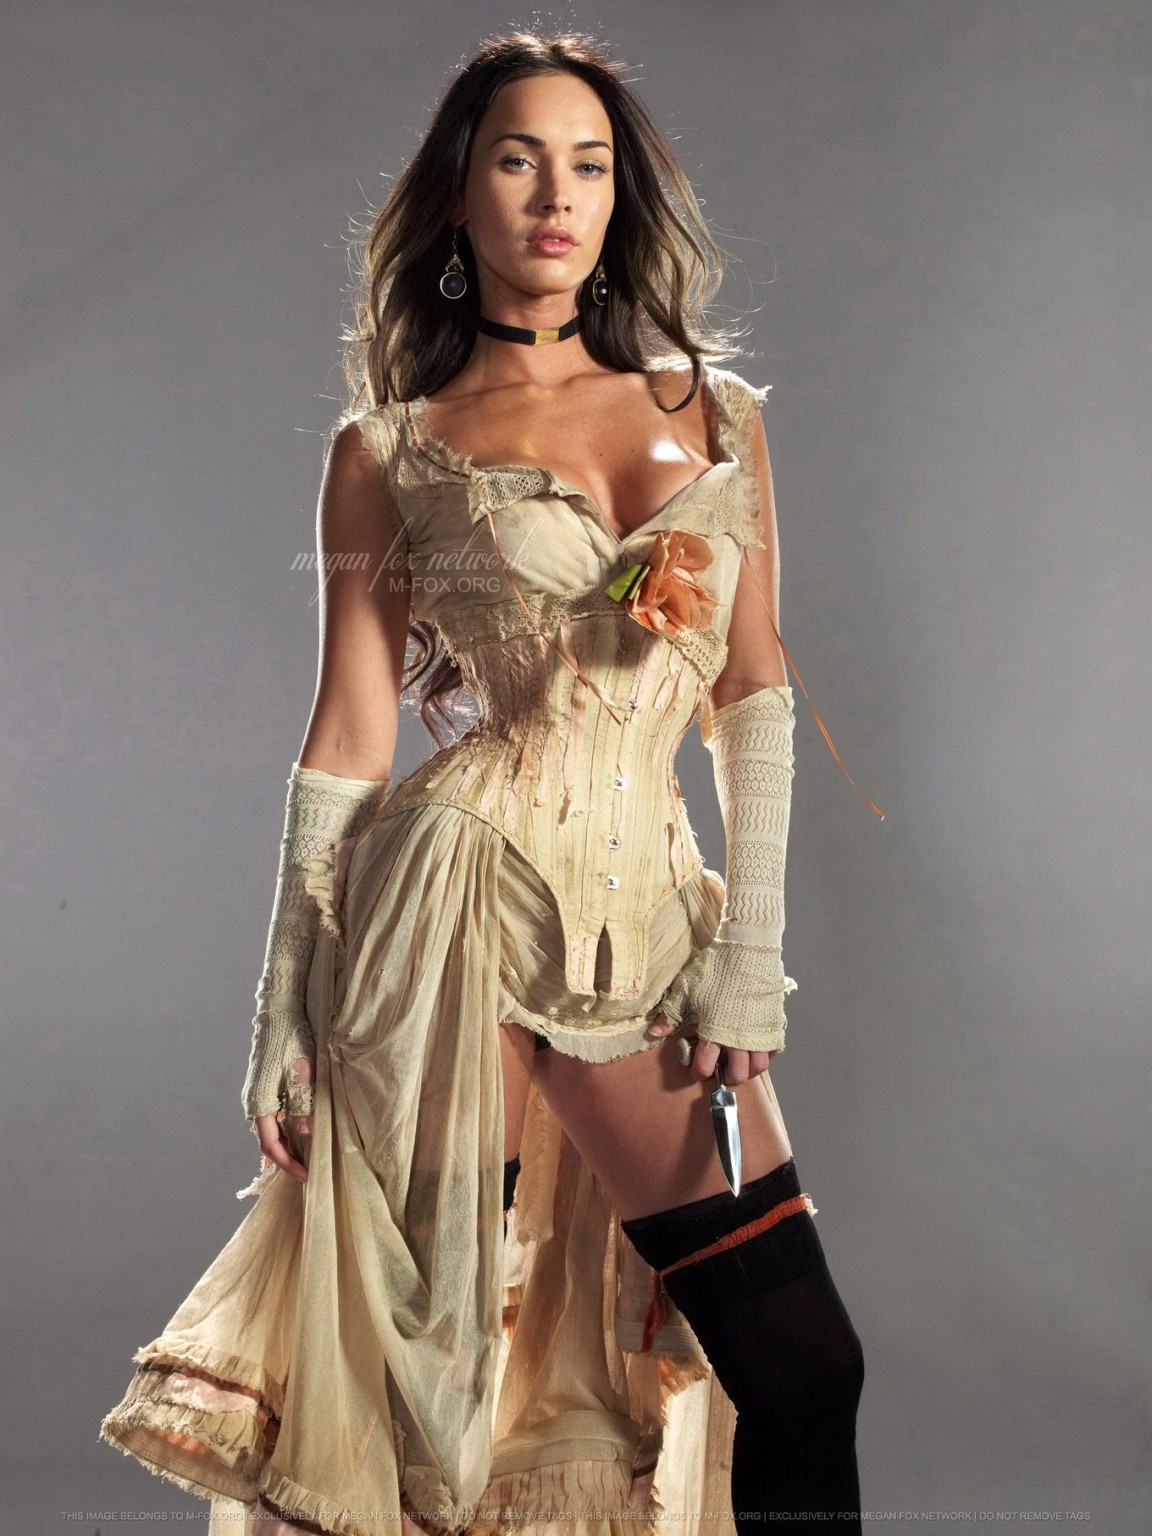 Megan Fox showing off her pussy  cleavage in Jonah Hex promos #75215518